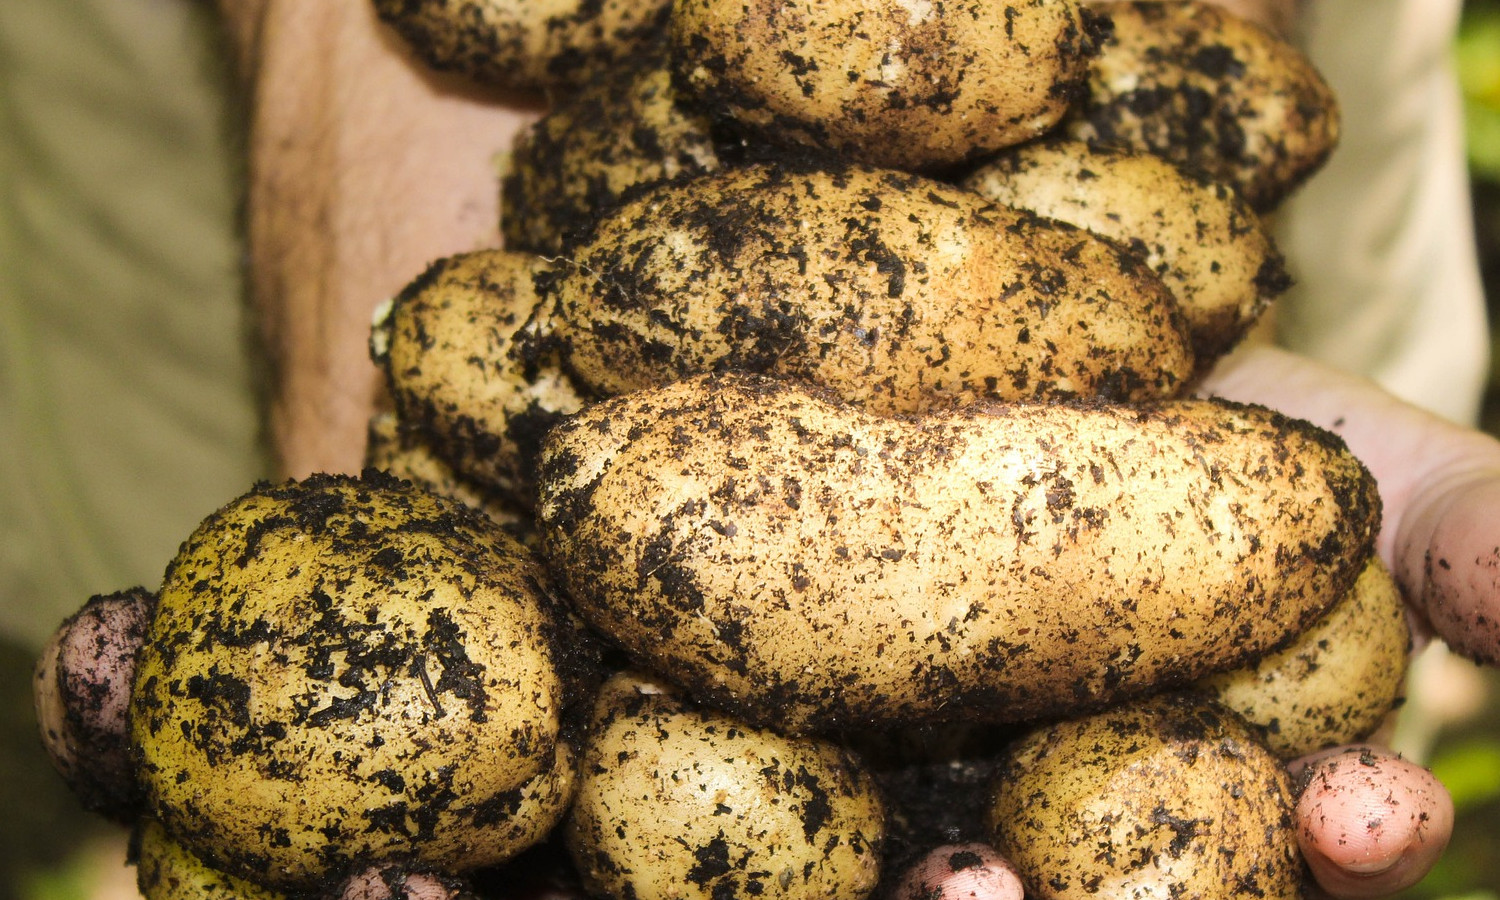 The unrecognized danger of the rotten potato - It gives off a deadly gas that kills in minutes!